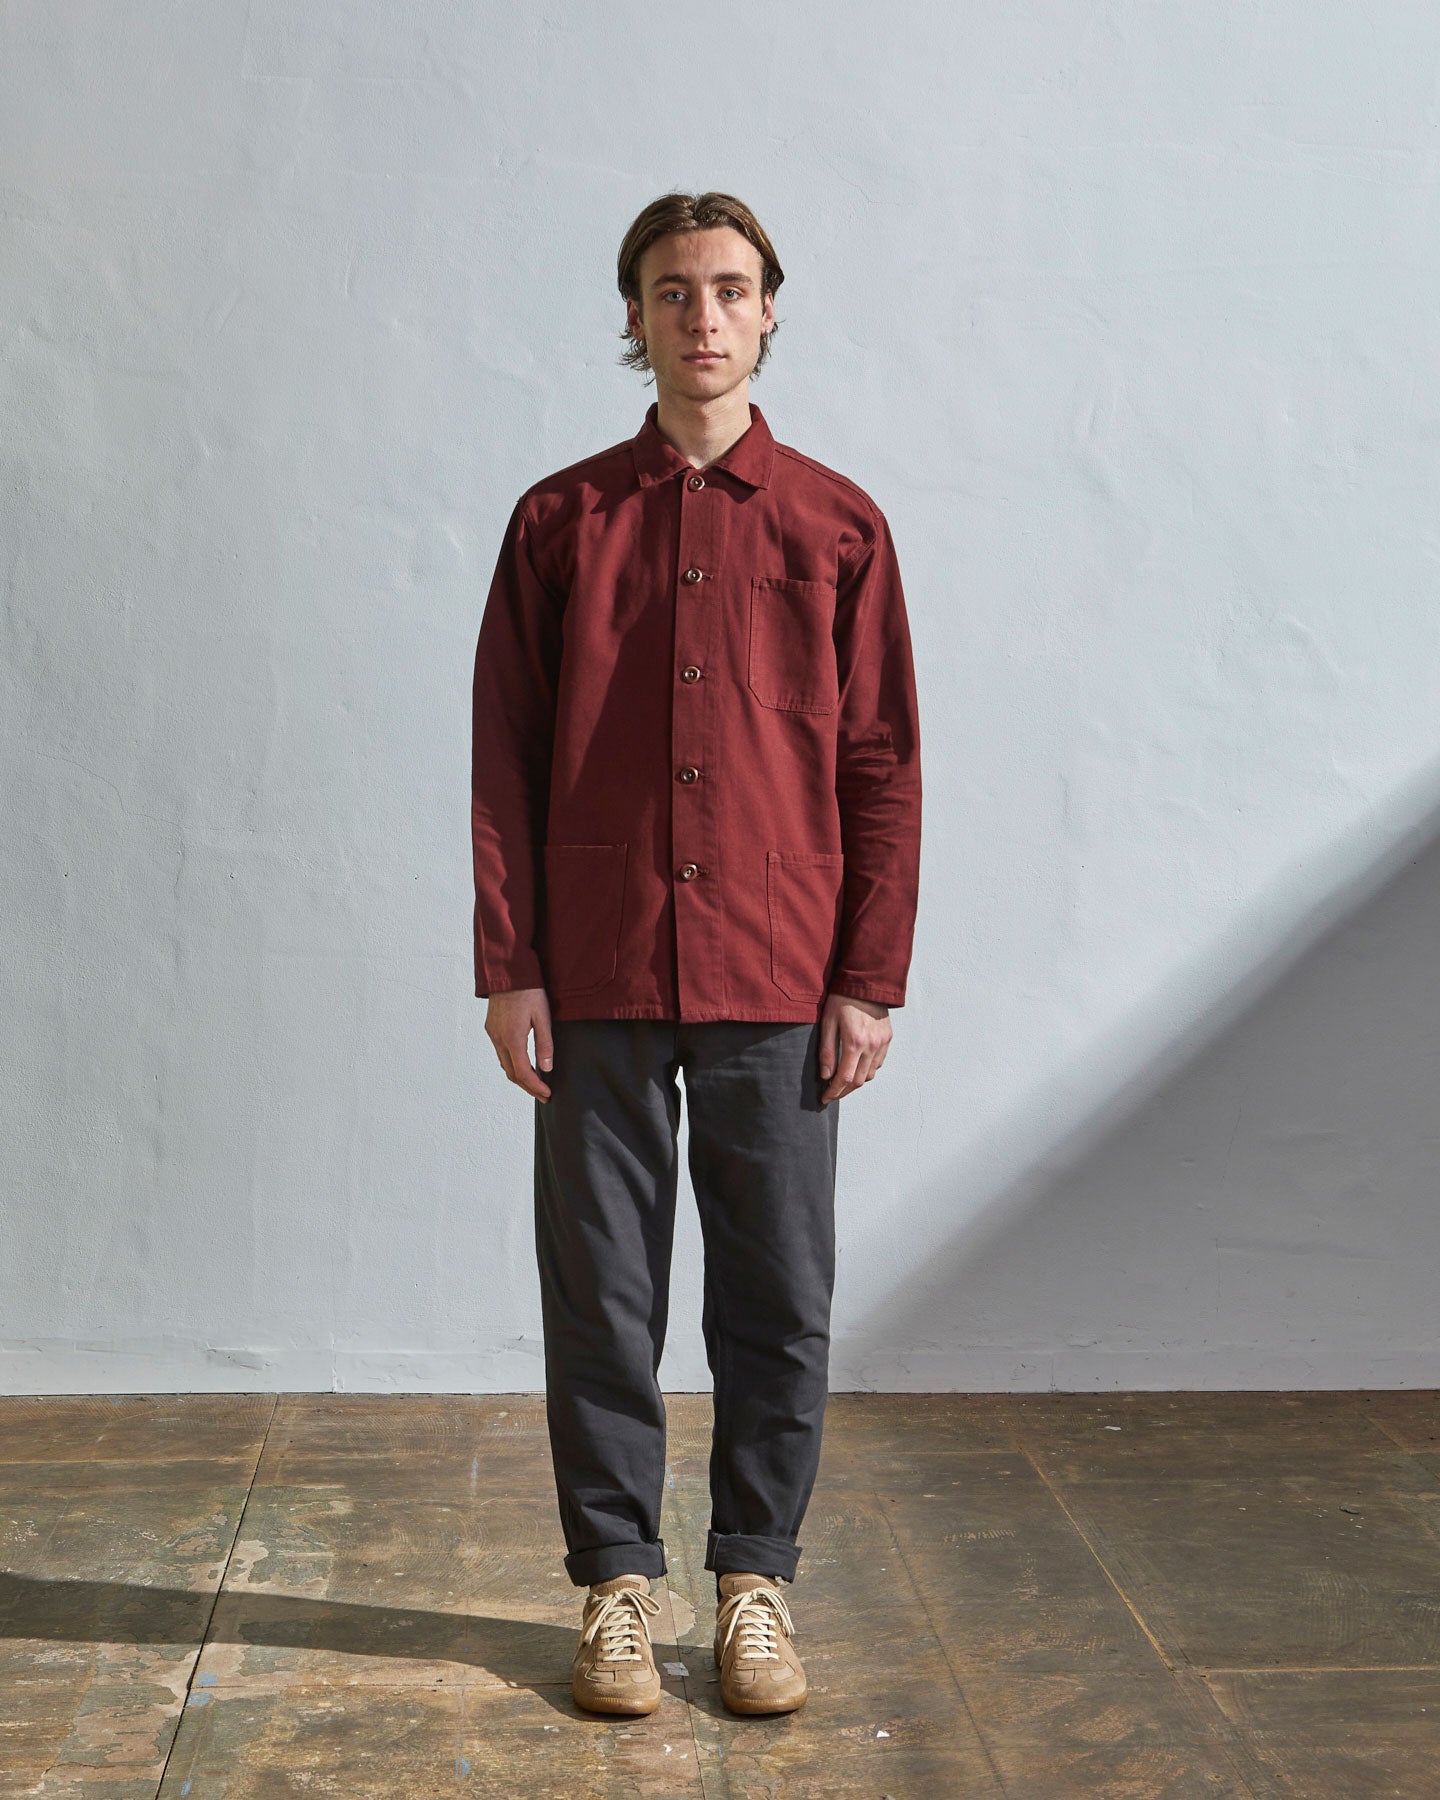 Full-length view of model wearing Uskees #3001 reddish-maroon overshirt showing utilitarian silhouette. Paired with charcoal pants.